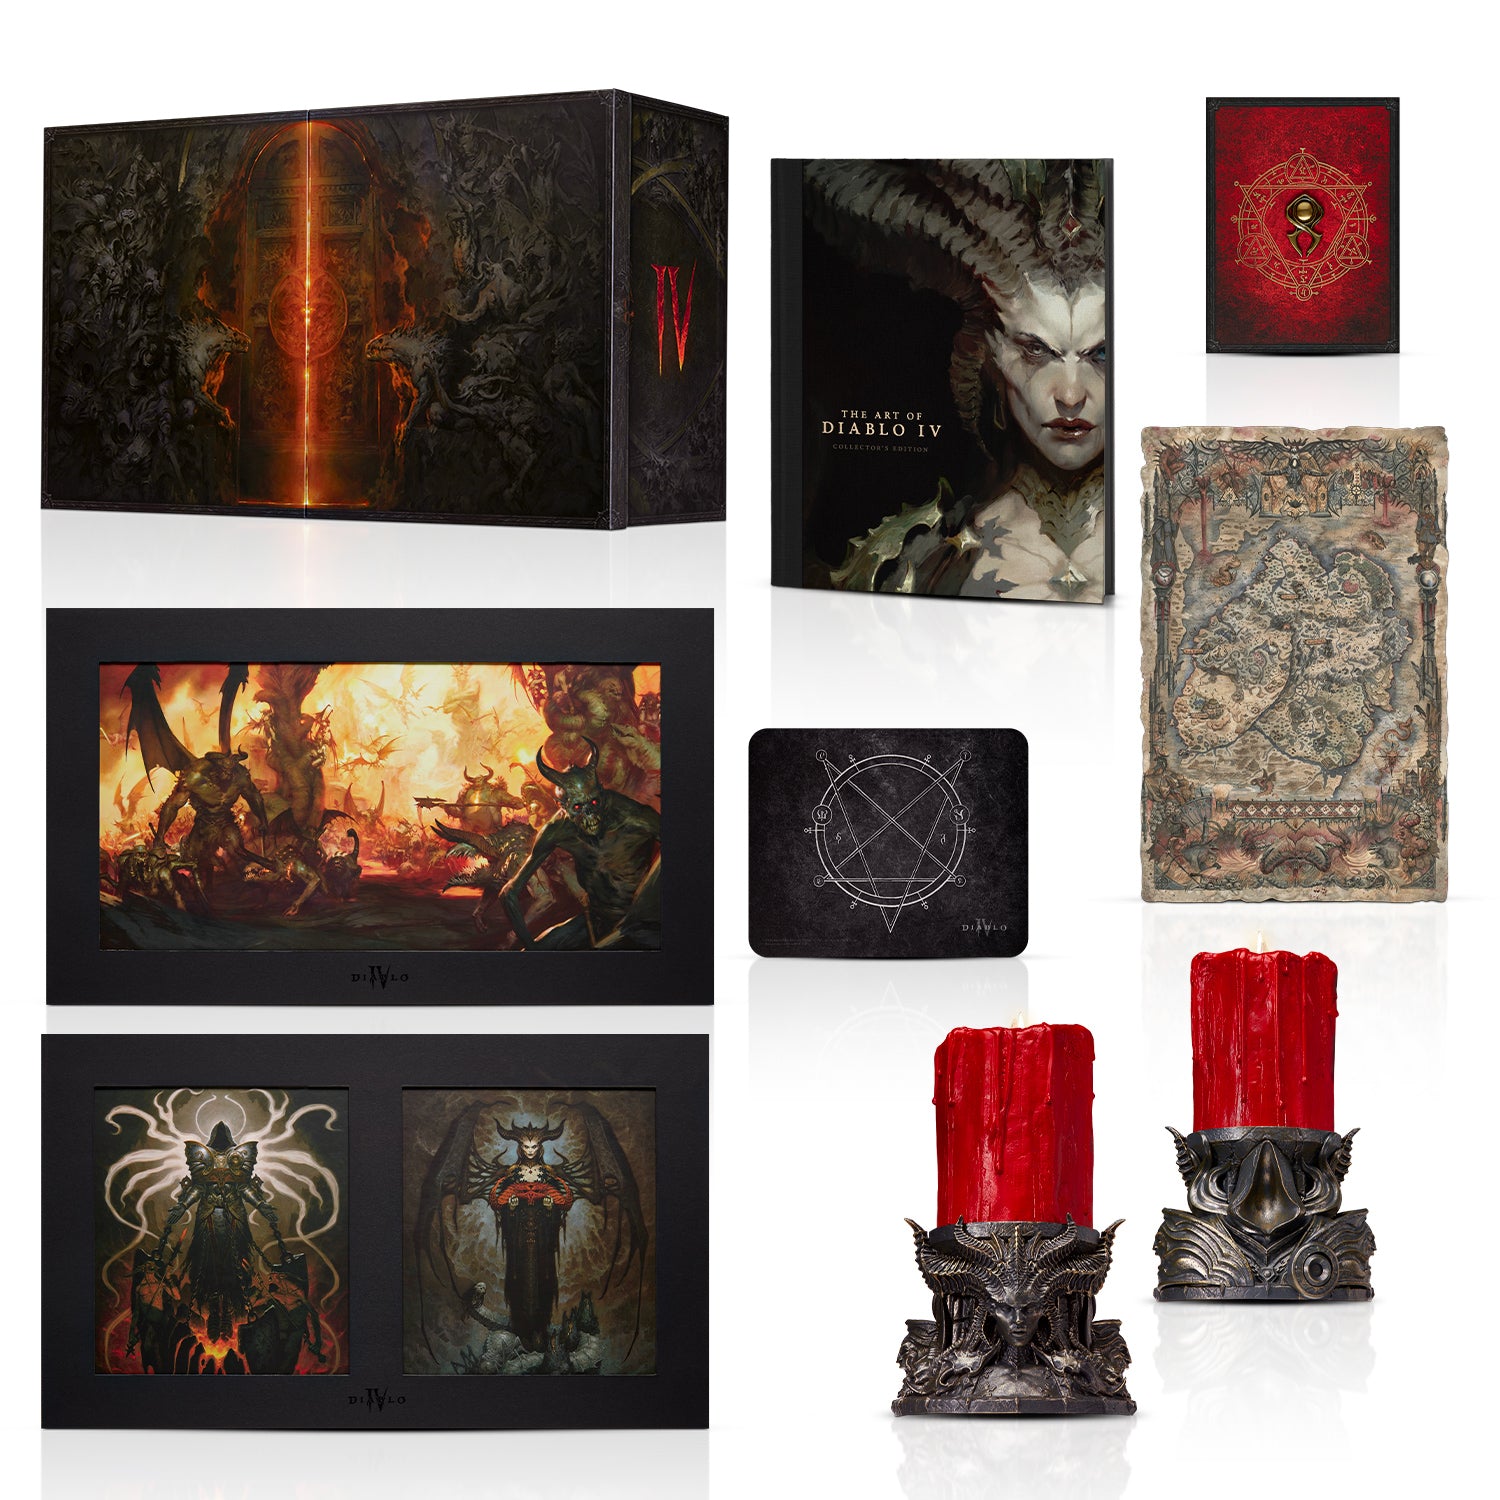 Diablo® IV Limited Collector’s Box - Full Overview